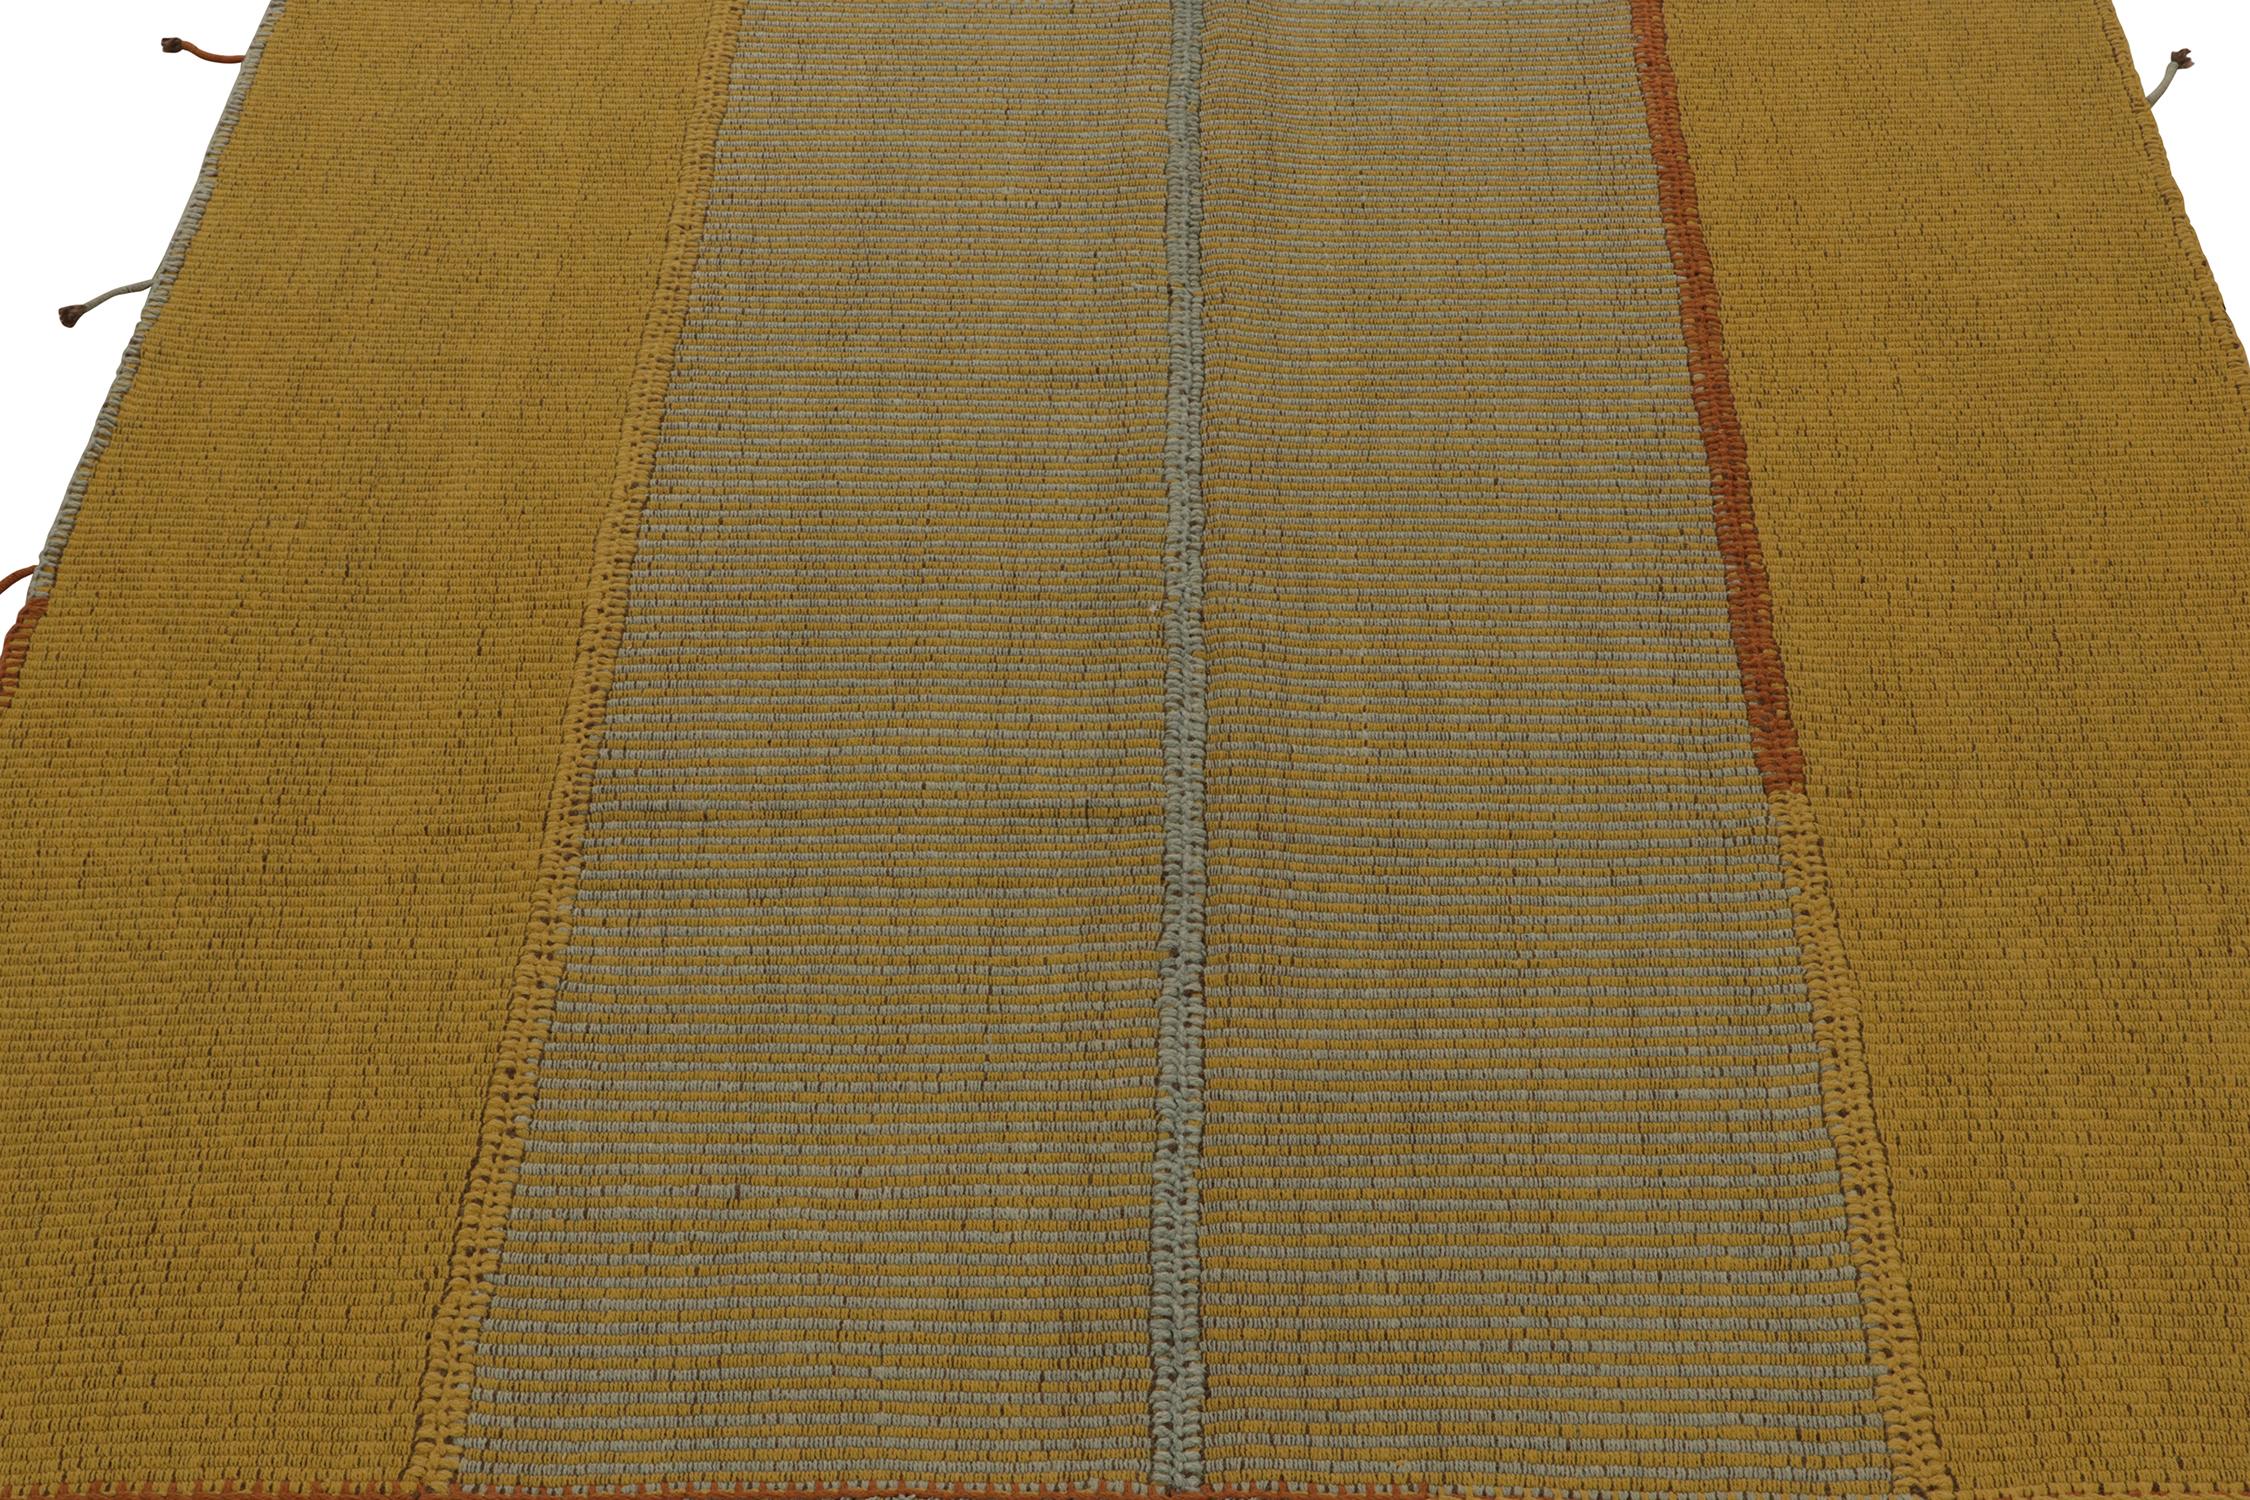 Modern Rug & Kilim’s Contemporary Square Kilim in Ochre, Blue Stripes and Brown Accents For Sale